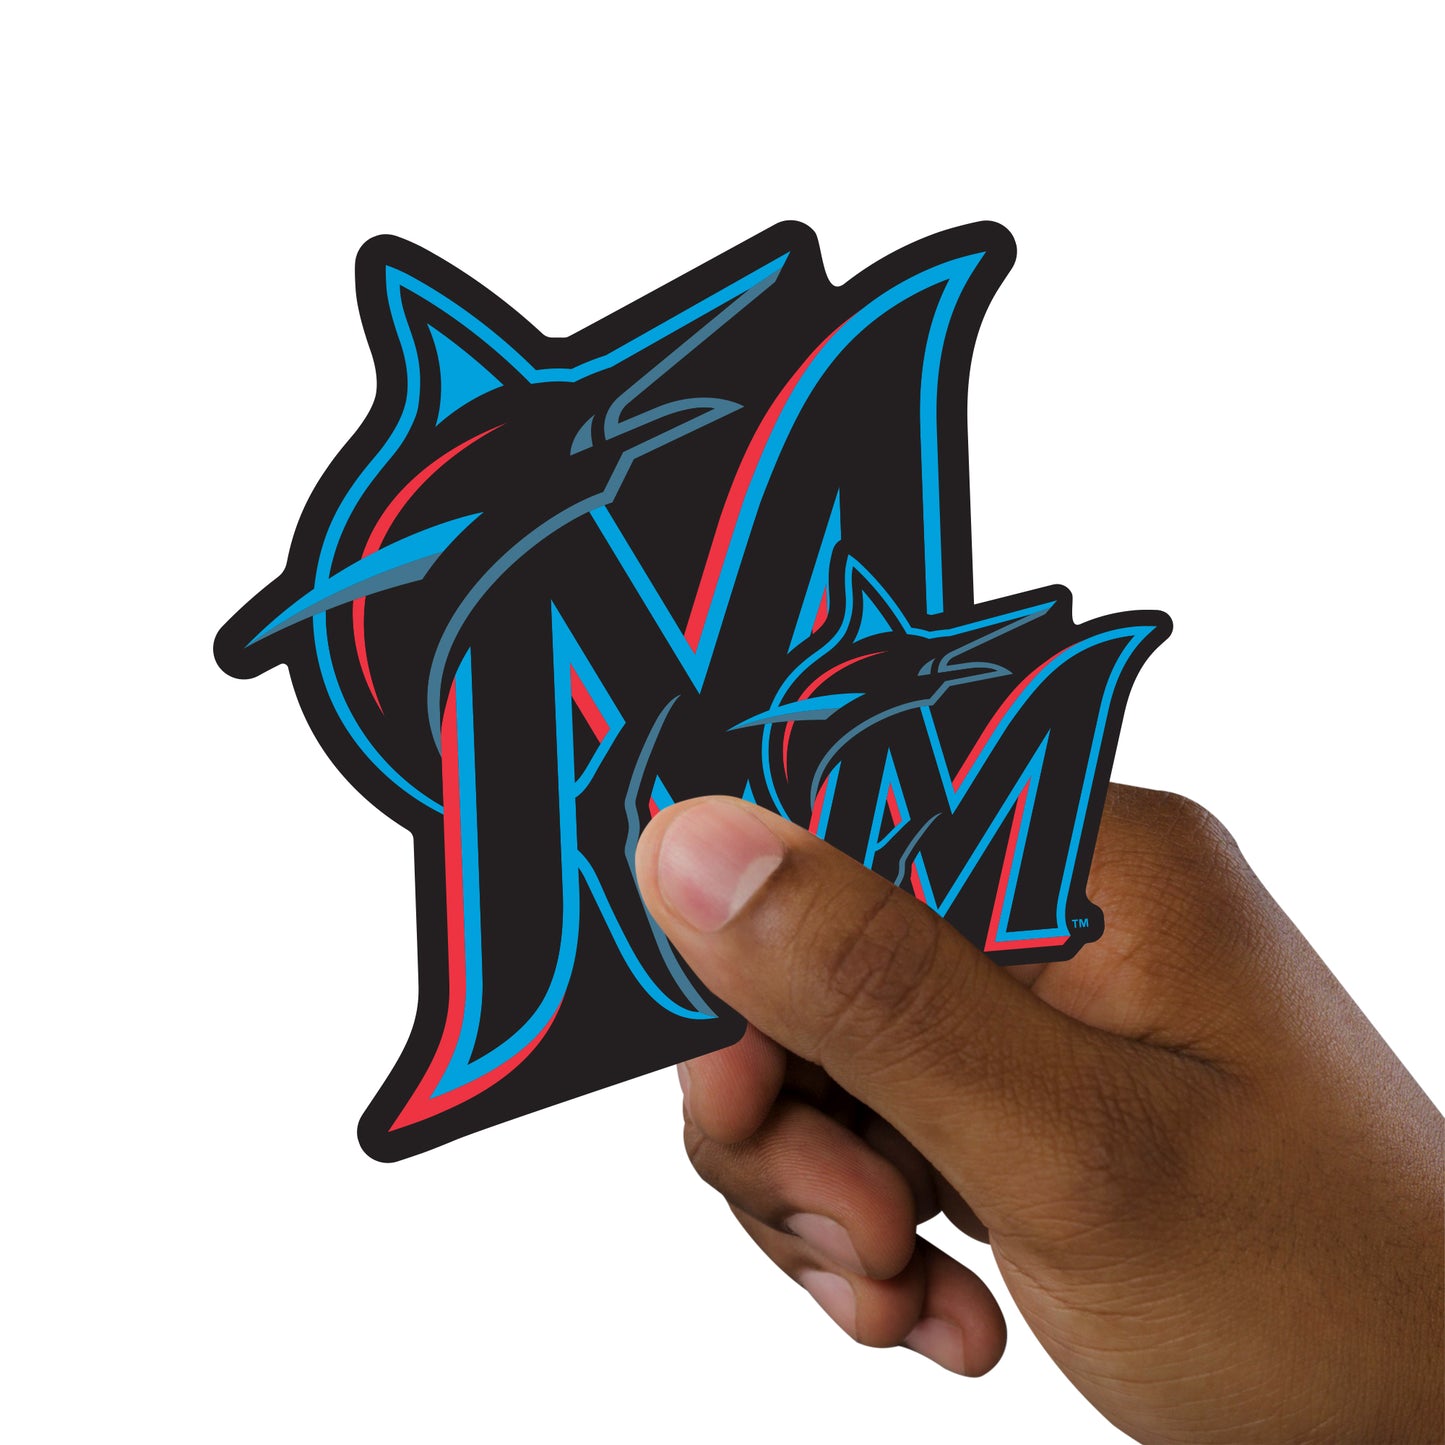 Miami Marlins Logo Coloring Page for Kids - Free MLB Printable Coloring  Pages Online for Kids 